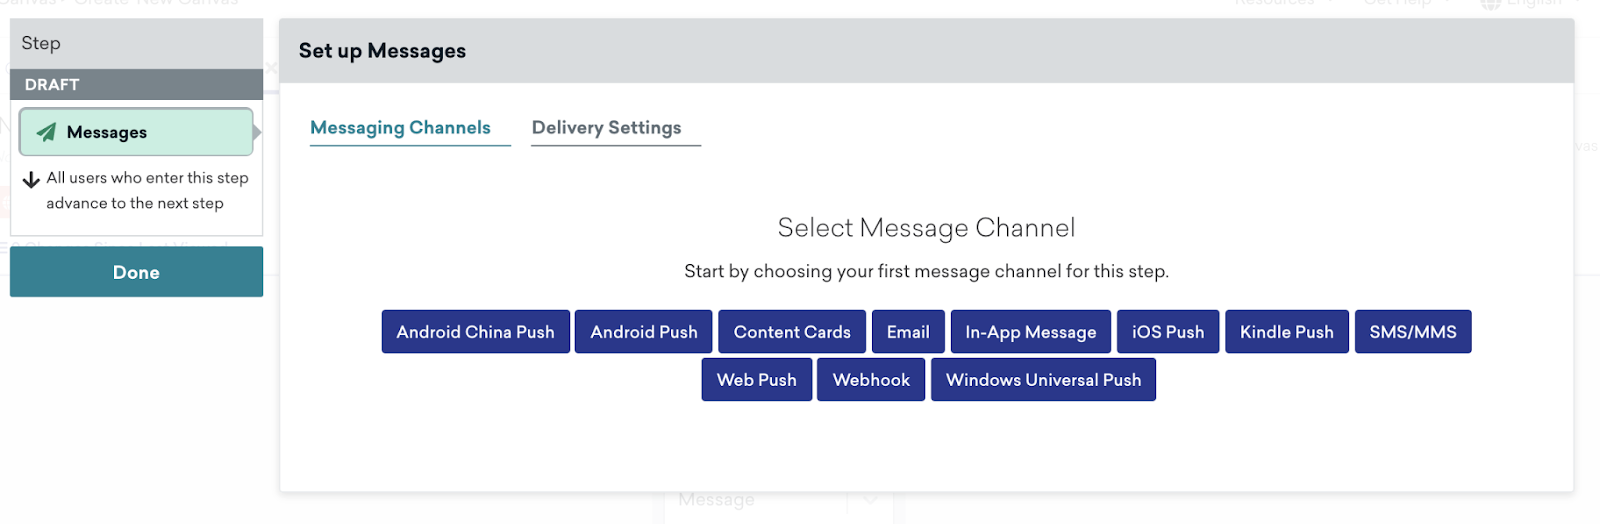 Set up Messages settings for a Canvas Message component that includes the option to select your message channel and customize delivery settings.